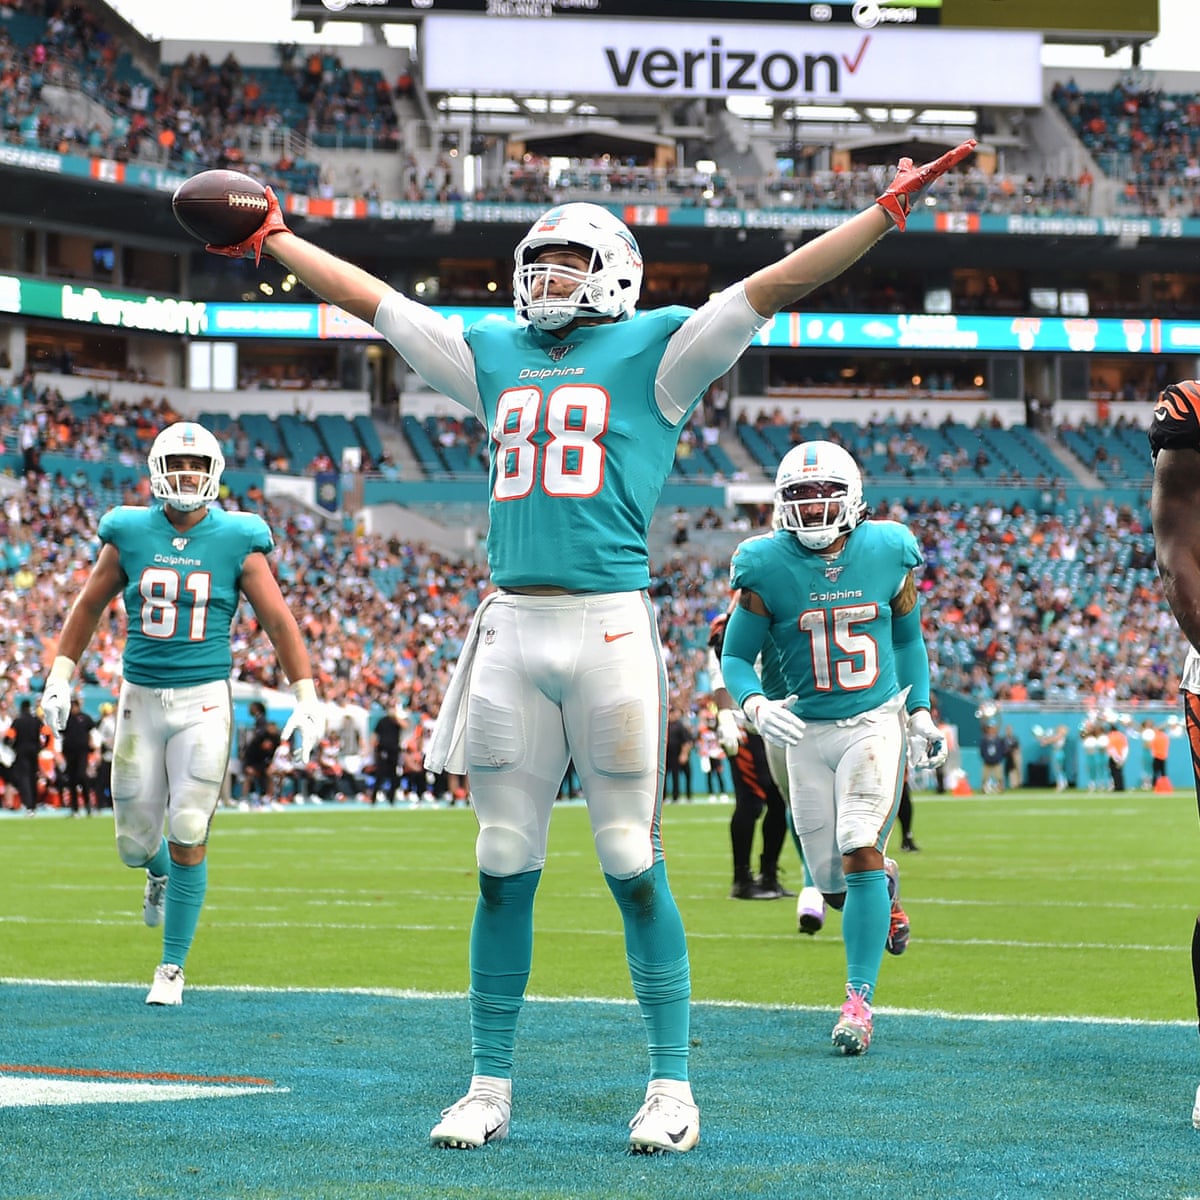 Miami Dolphins to admit 13,000 fans for NFL opener in 'risky' plan